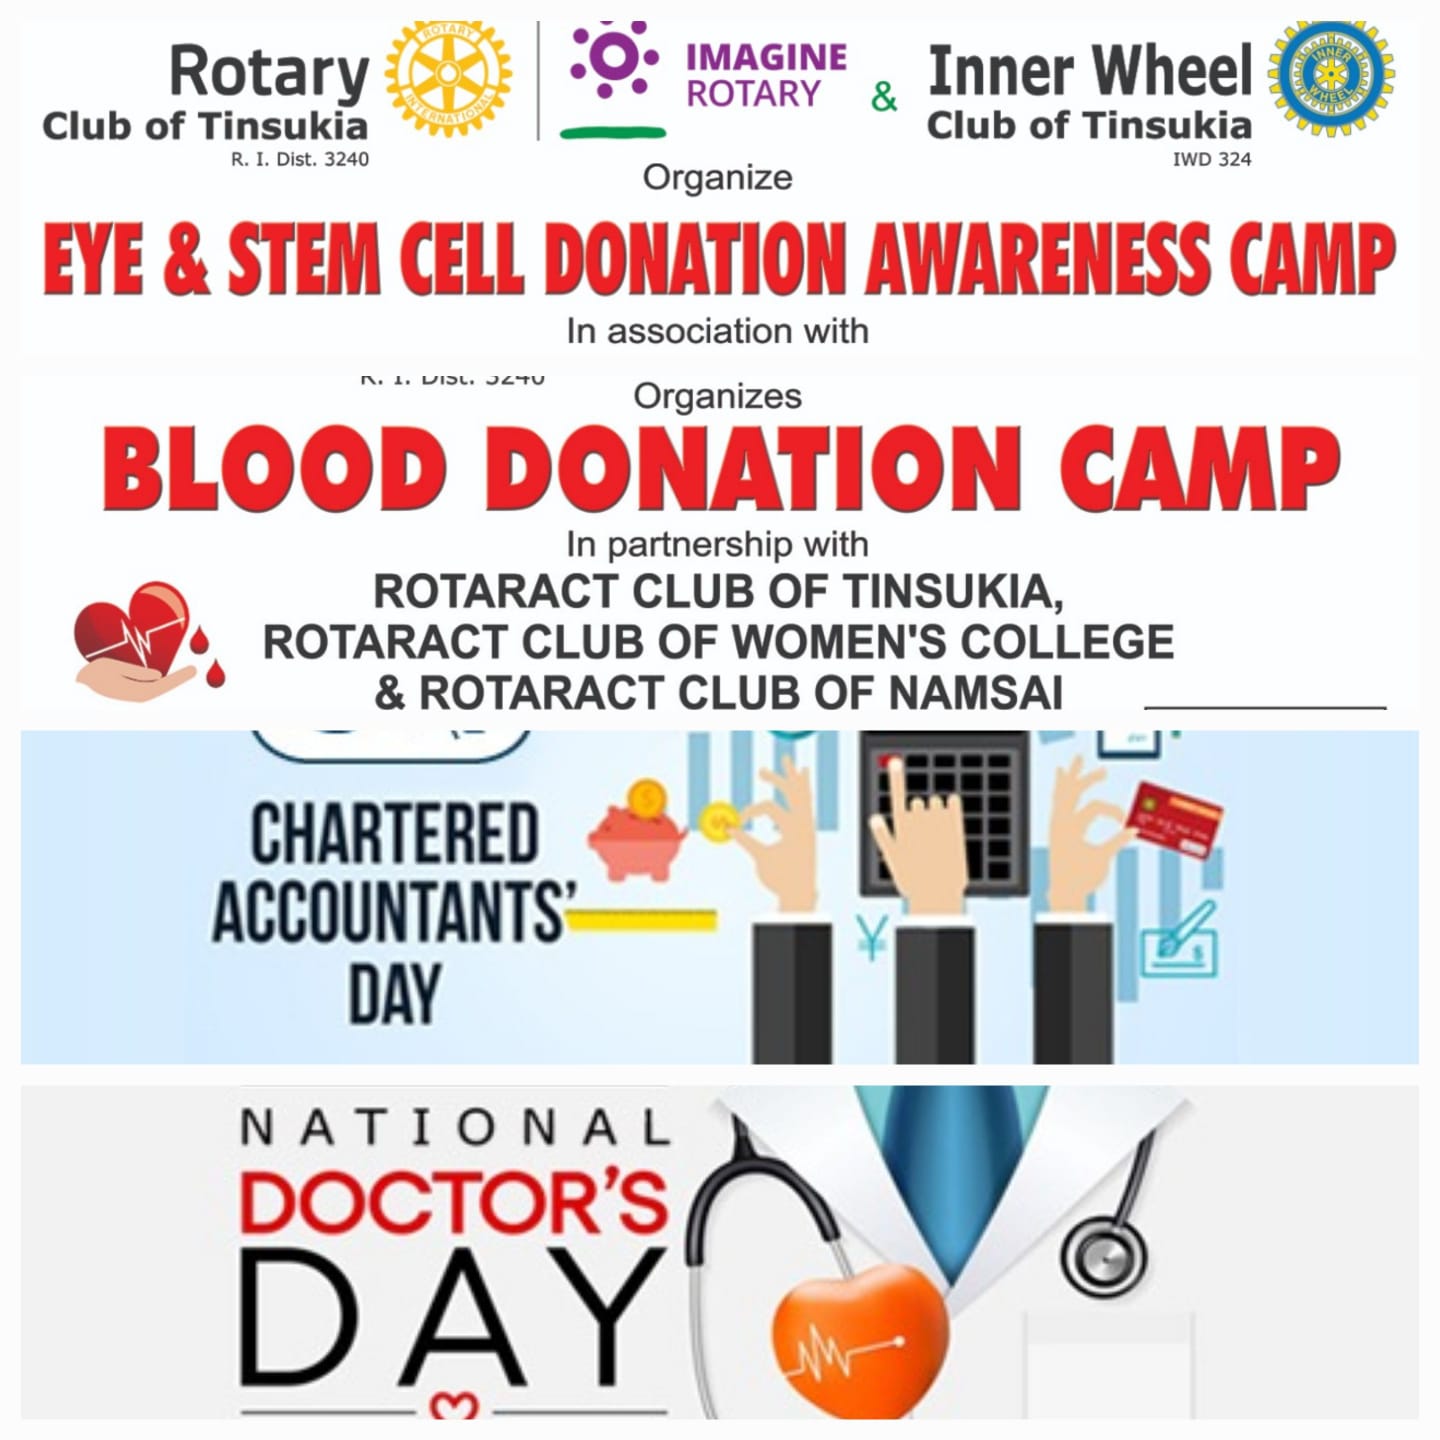 Felicitation of Doctors and charted accountants/ Blood Donation Camp/ Eye and Stem-cell Donation Awareness Camp.